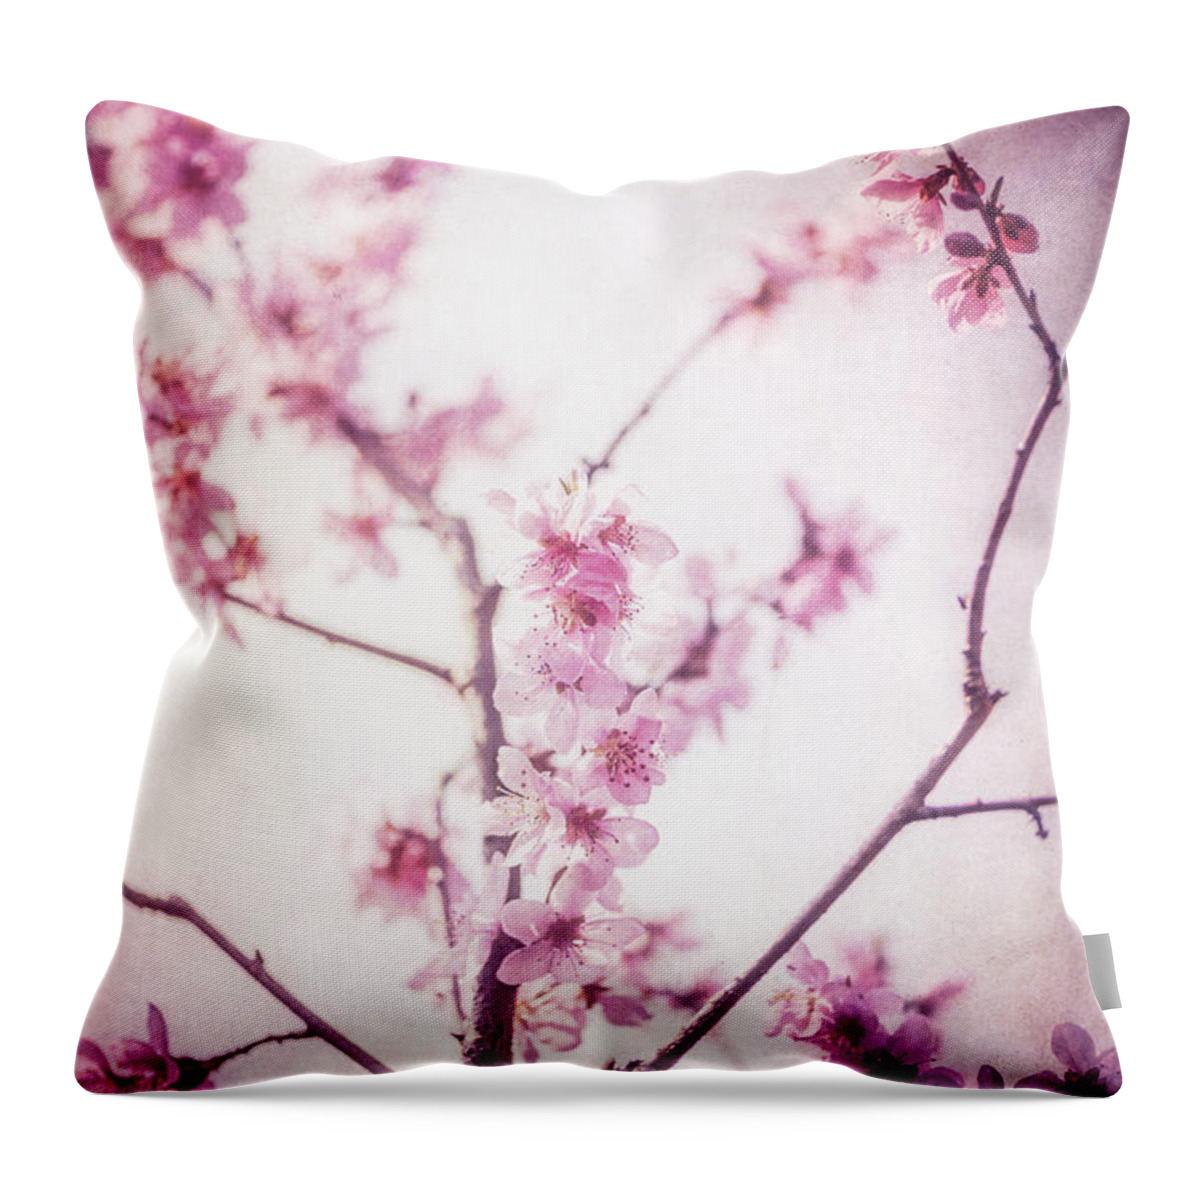 Flowers Throw Pillow featuring the photograph Leave Me Alone With The Grace by Philippe Sainte-Laudy